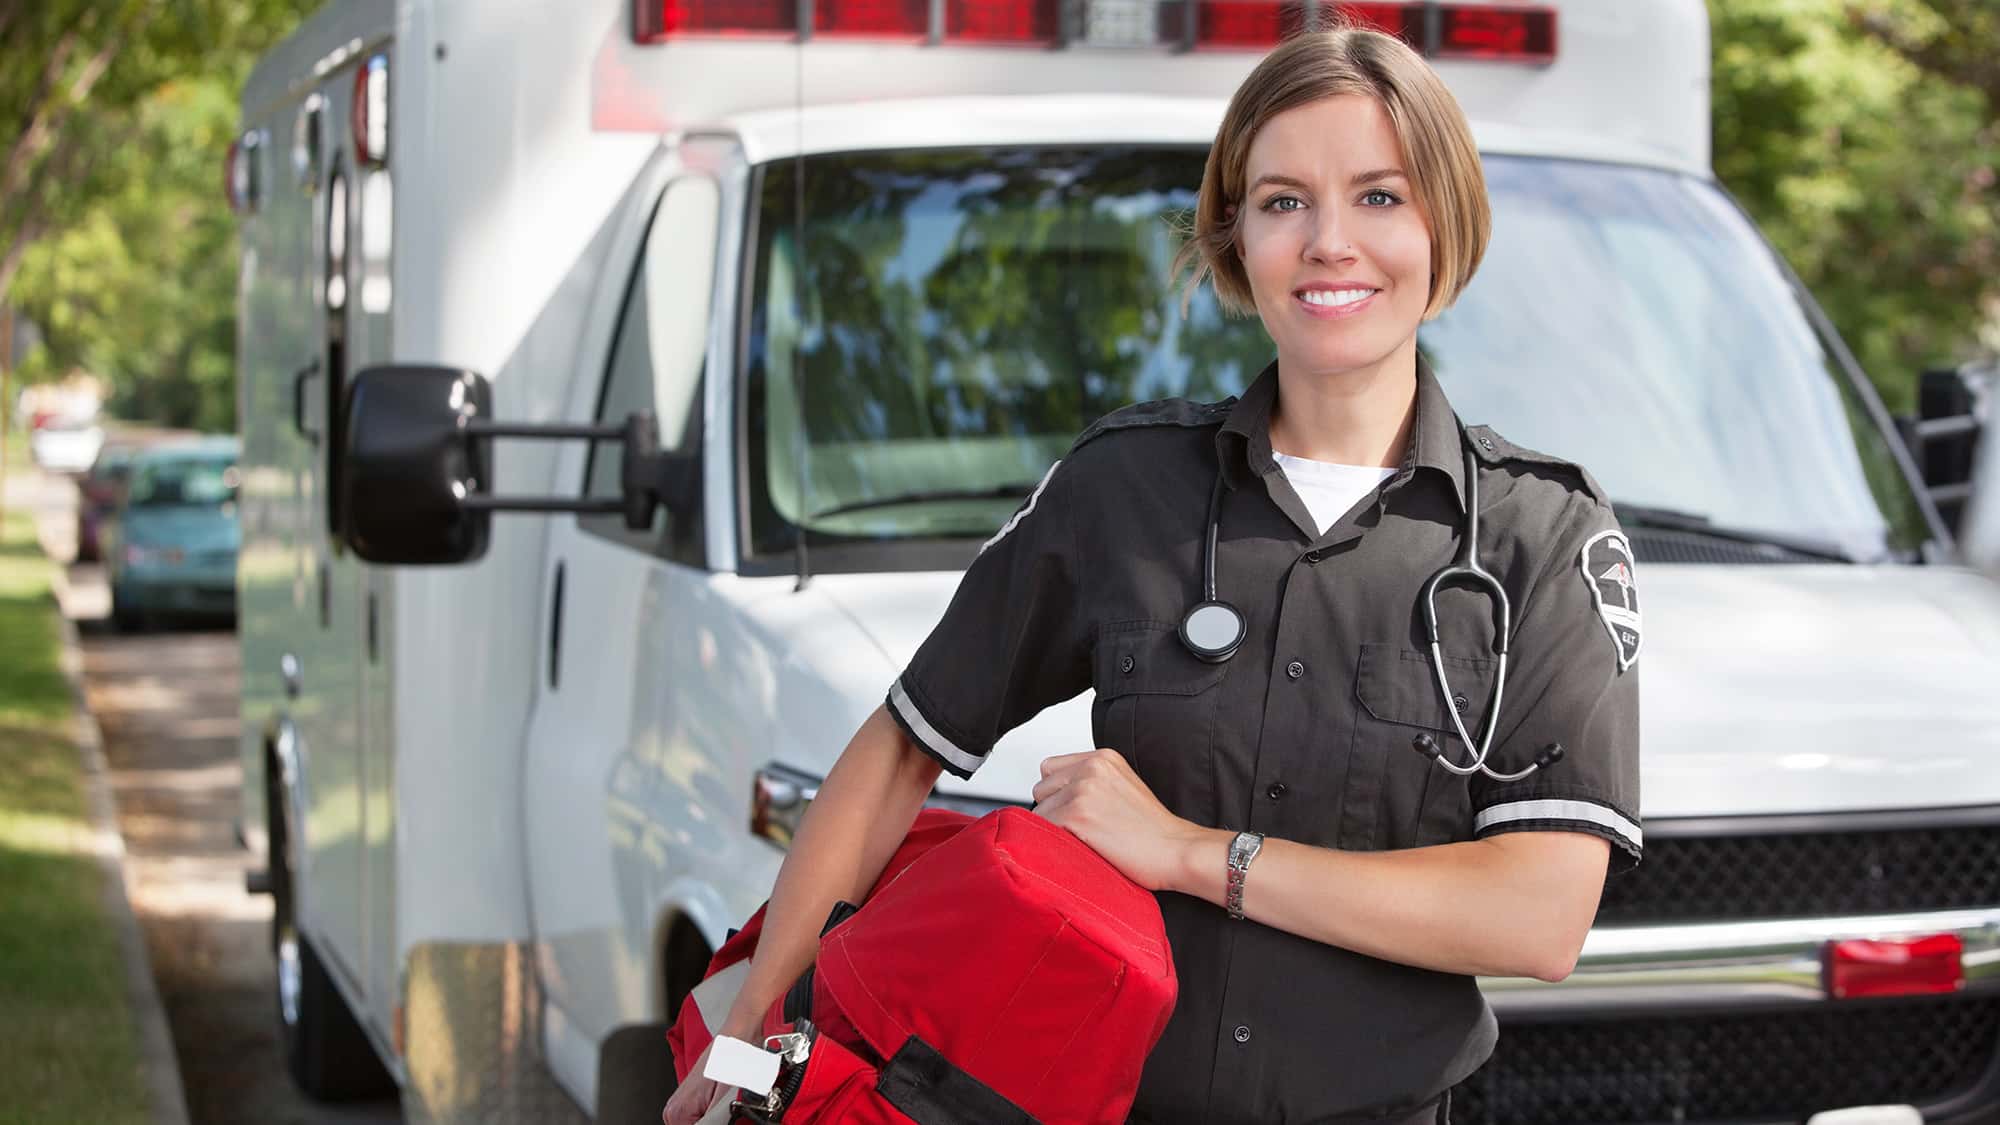 Professional Ambulance EMT standing infront of ambulance with red bag